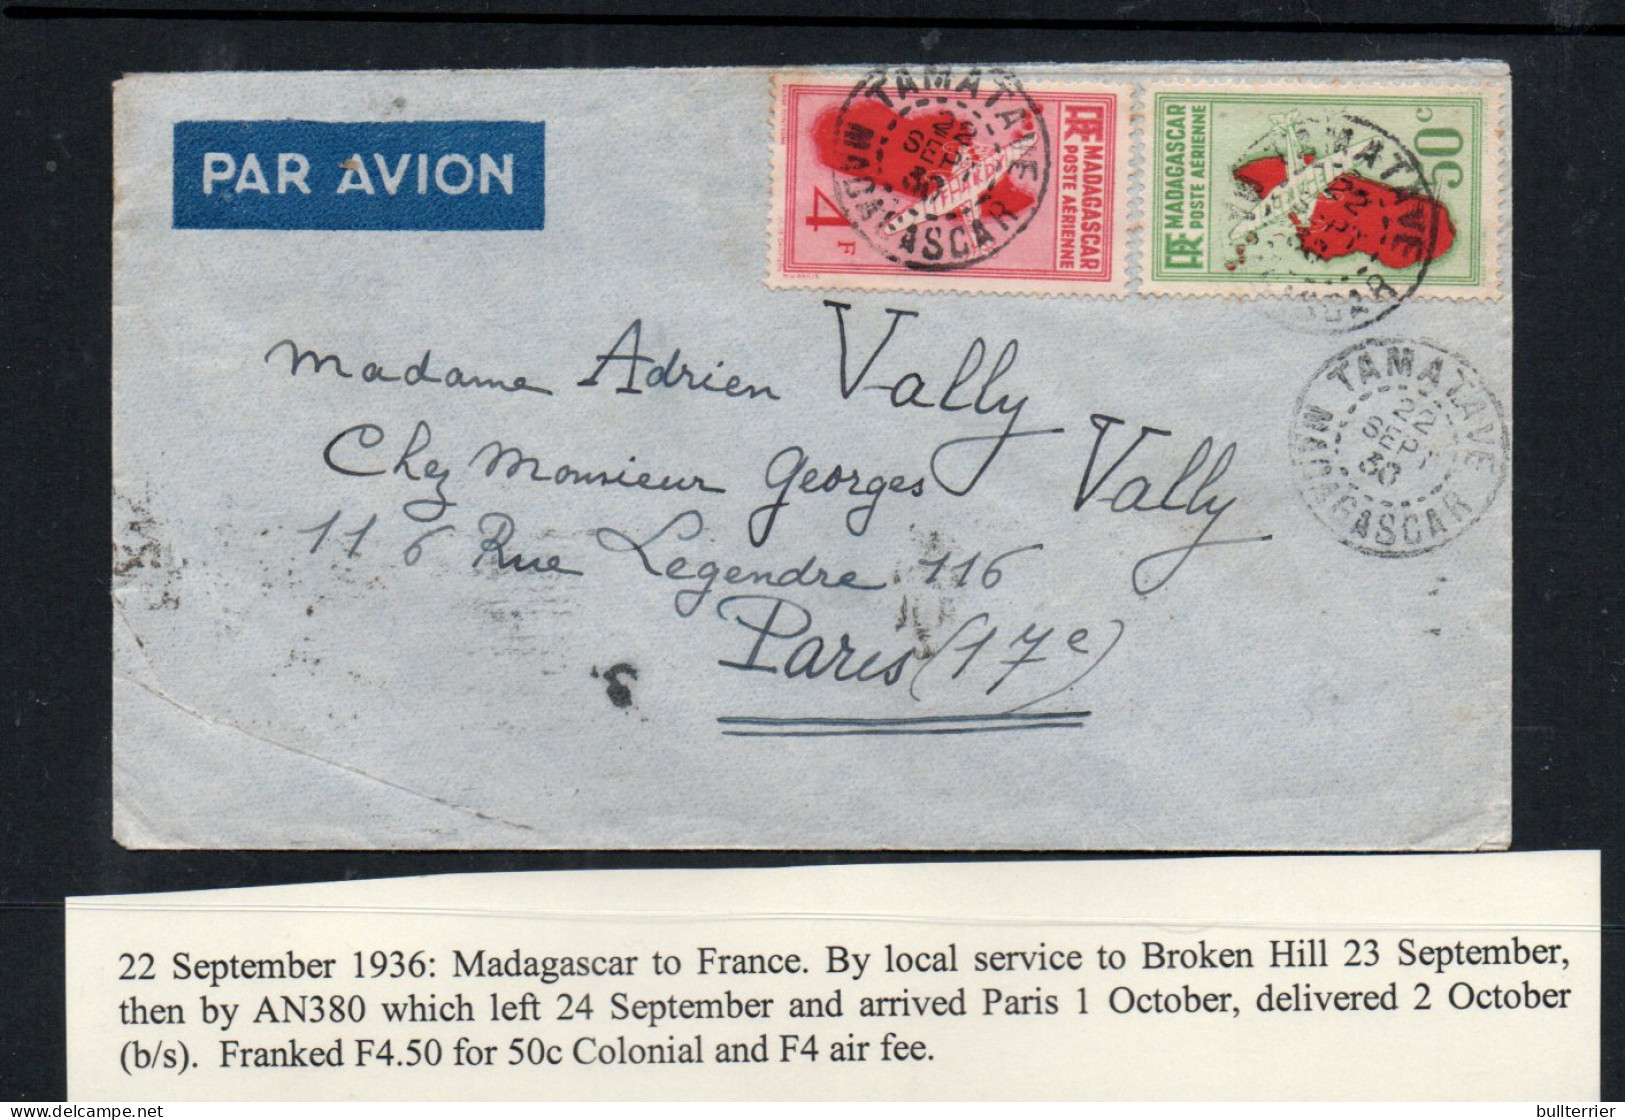 MADAGASCAR - 1936-  AN380 AIRMAIL COVER TO FRANCE WITH BACKSTAMPS - Posta Aerea